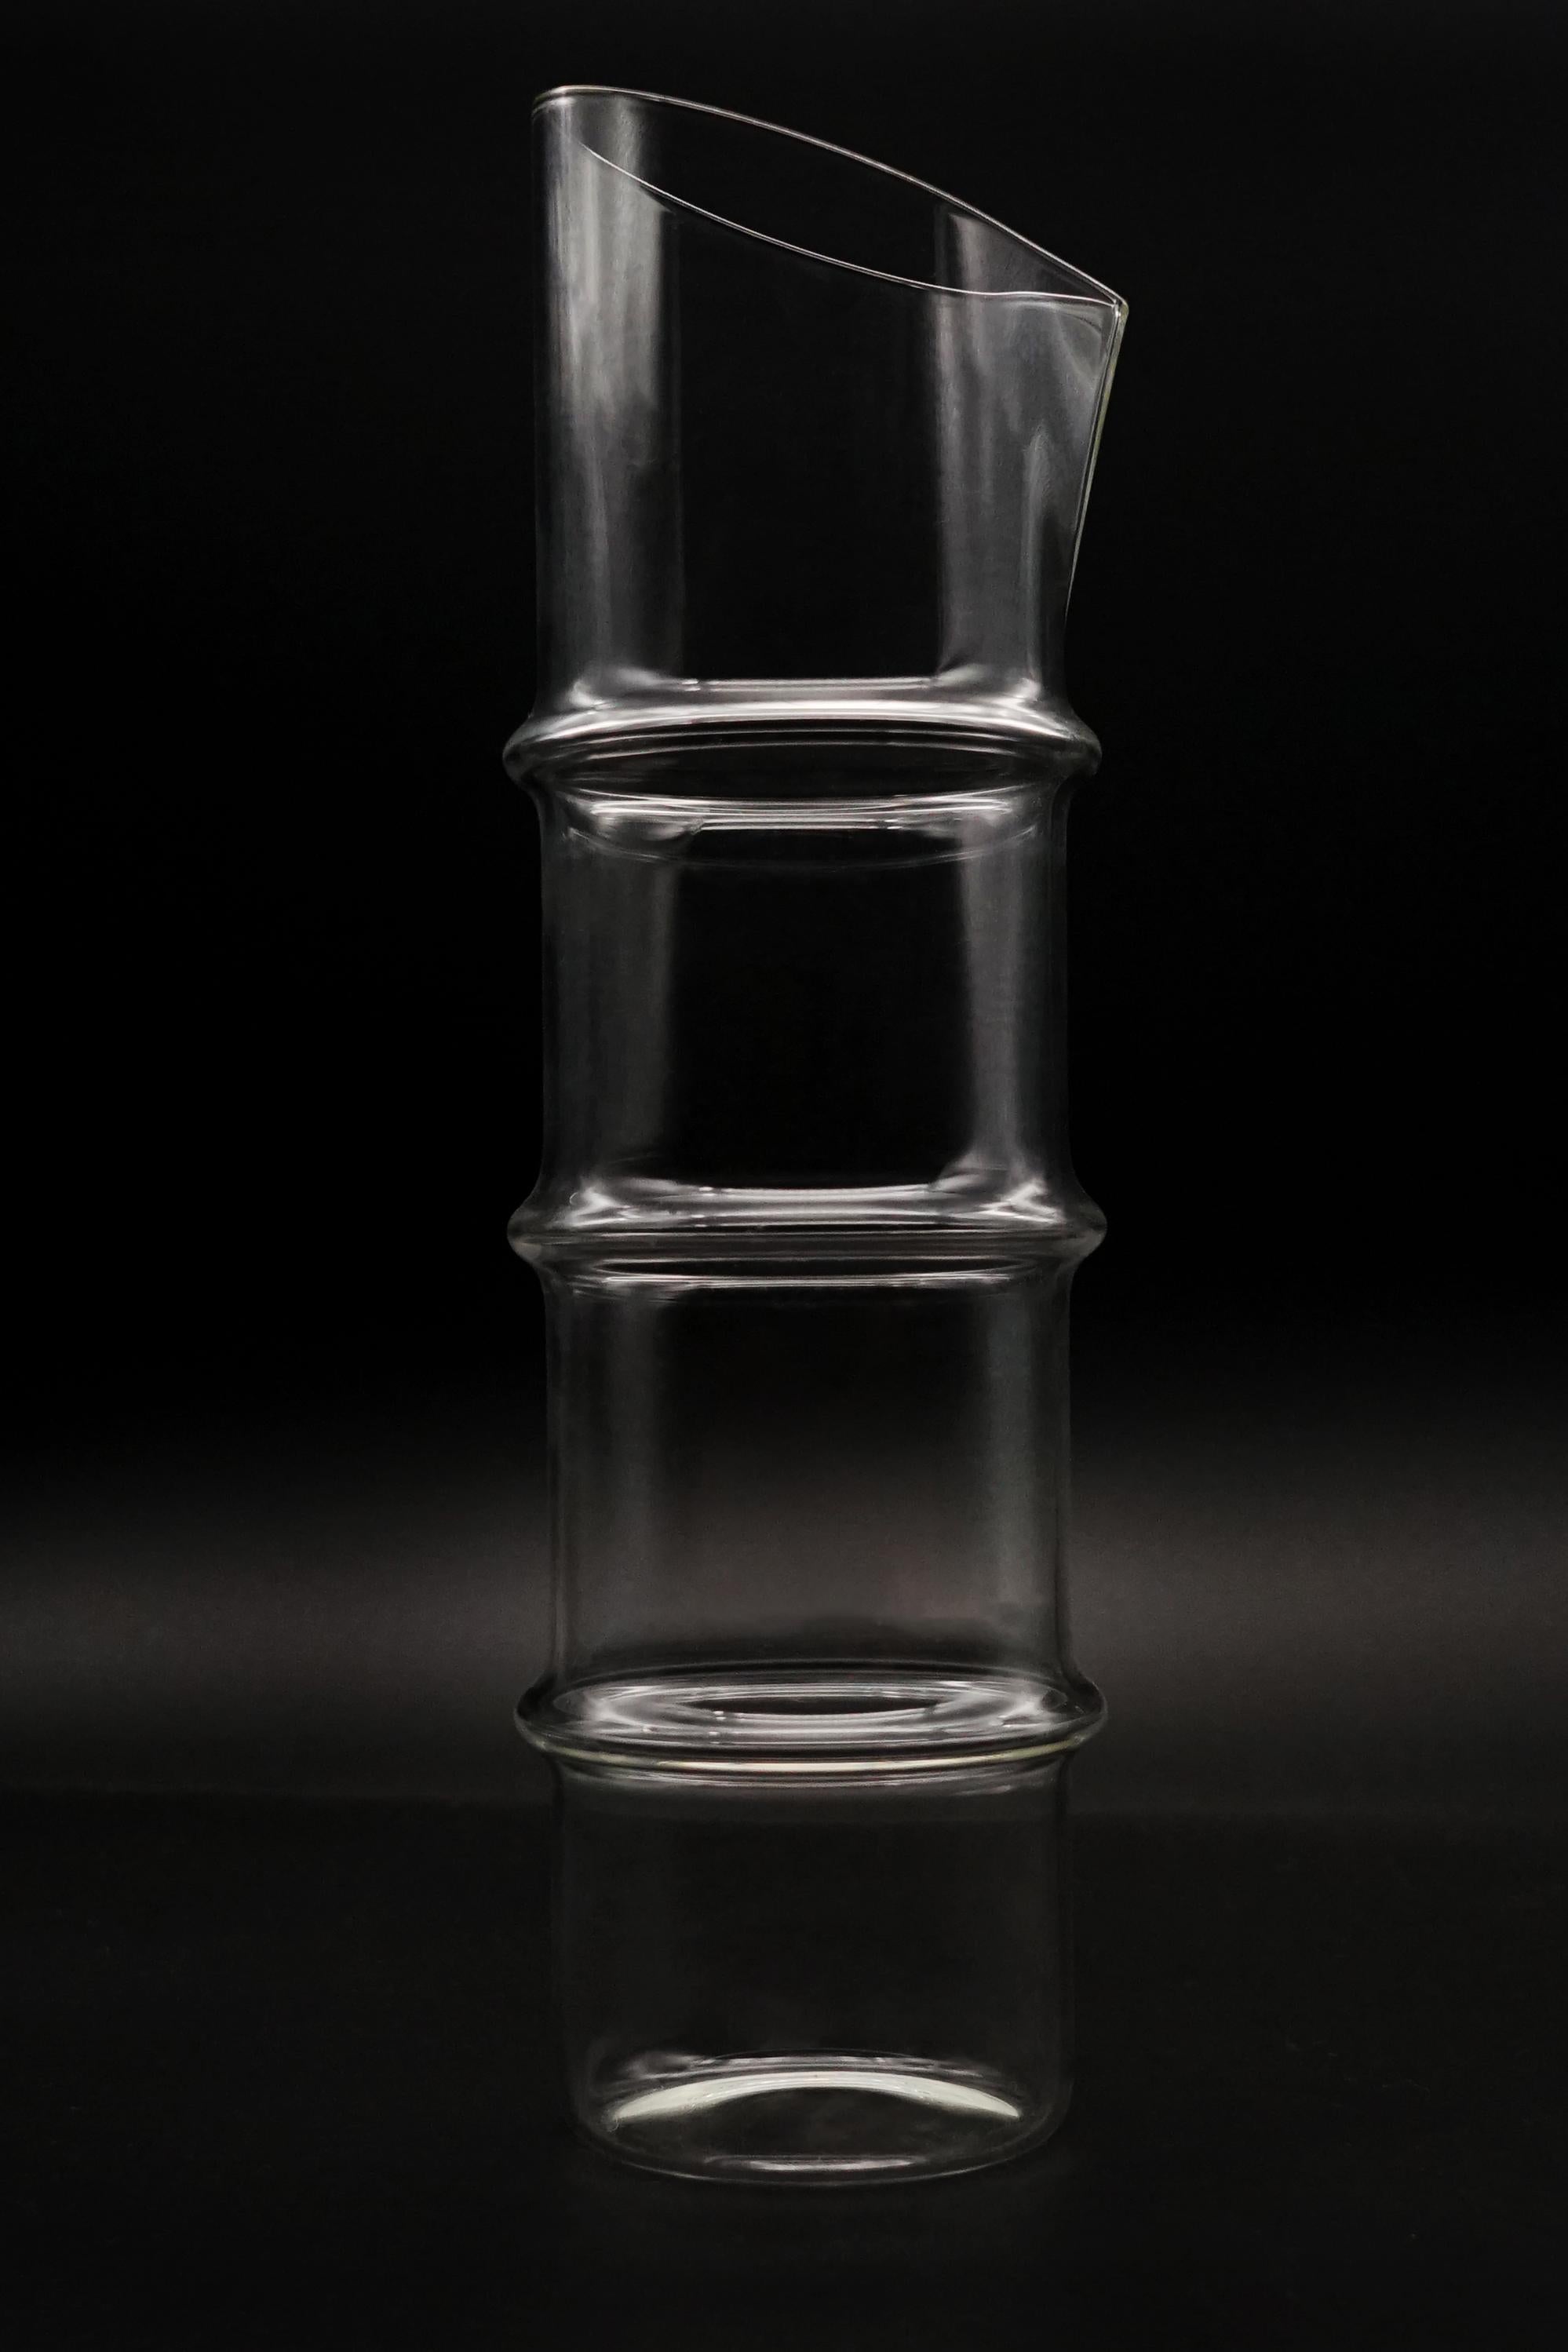 Italian 21st Century Hand-Crafted Glass Carafe TAKE 75cl, Trasparent, Kanz Architetti For Sale